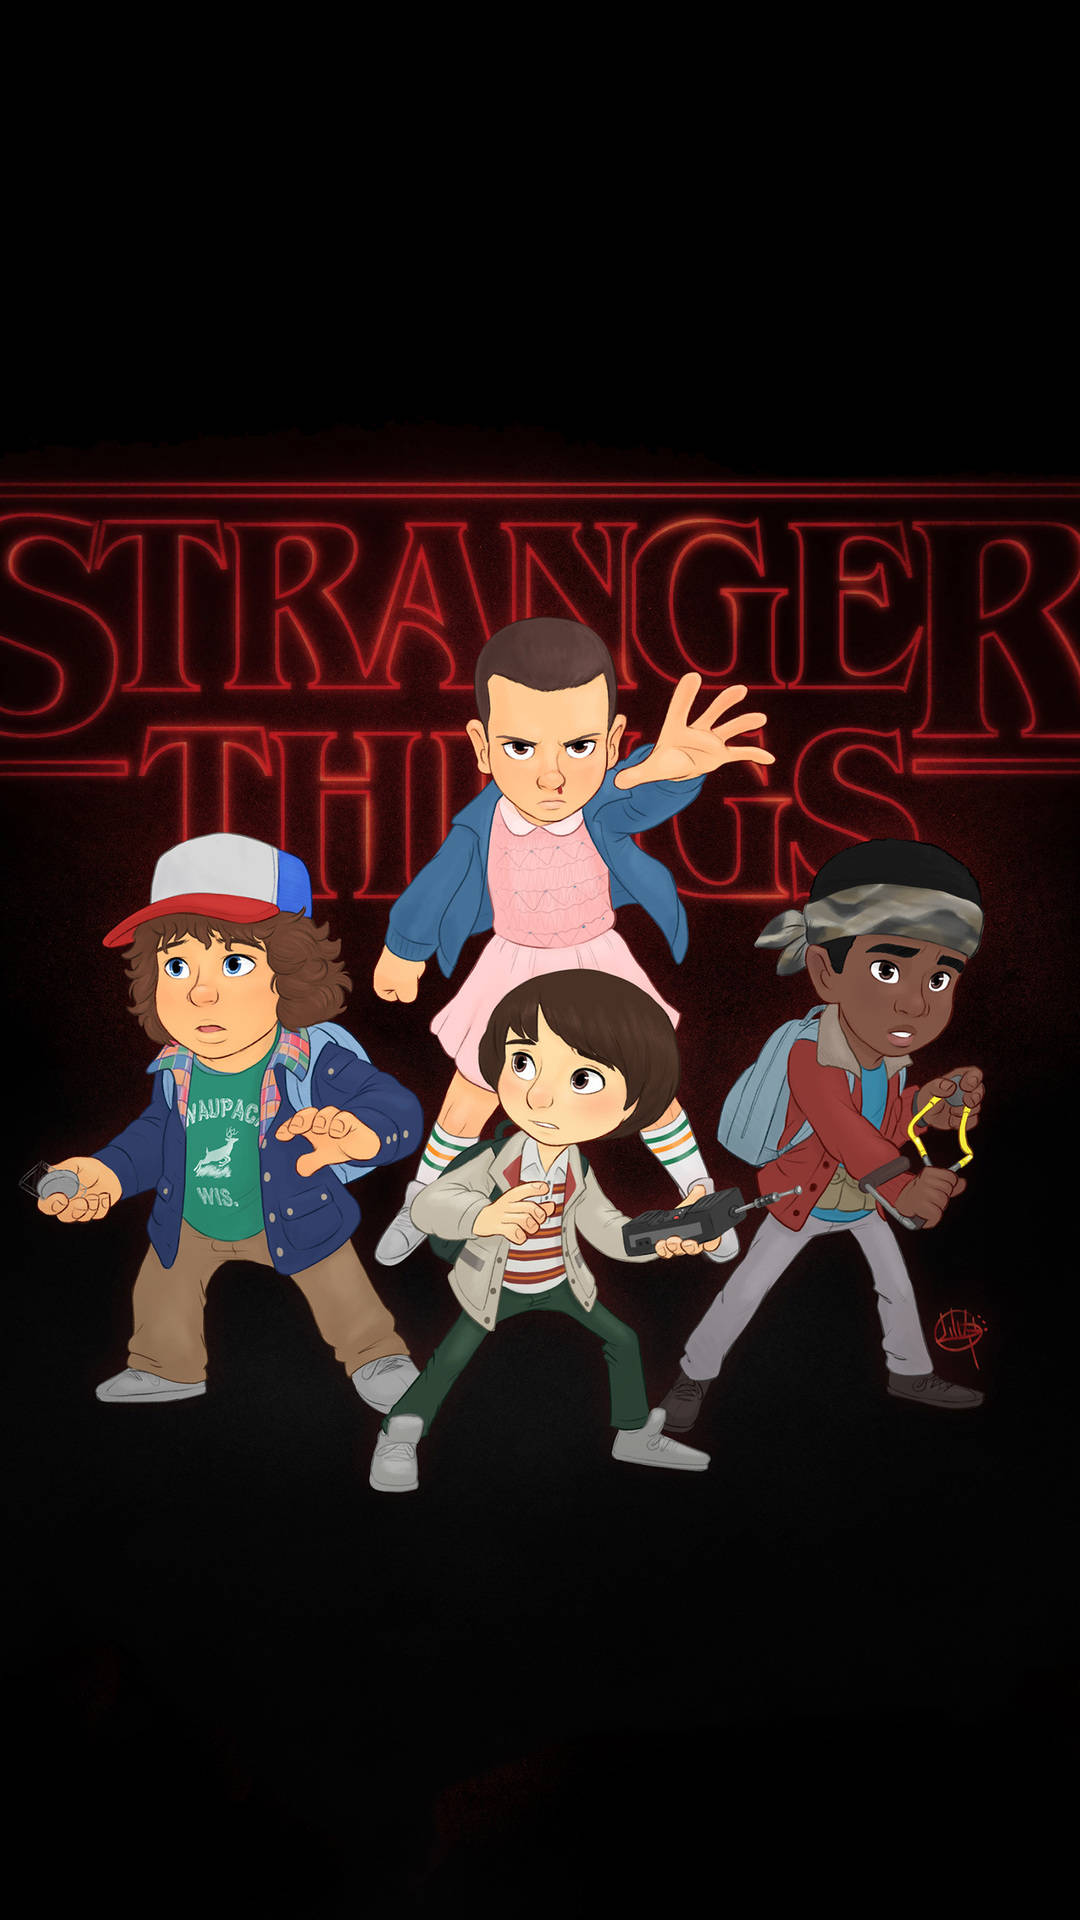 Life is full of surprises - explore the “Stranger Things” on your iPhone Wallpaper